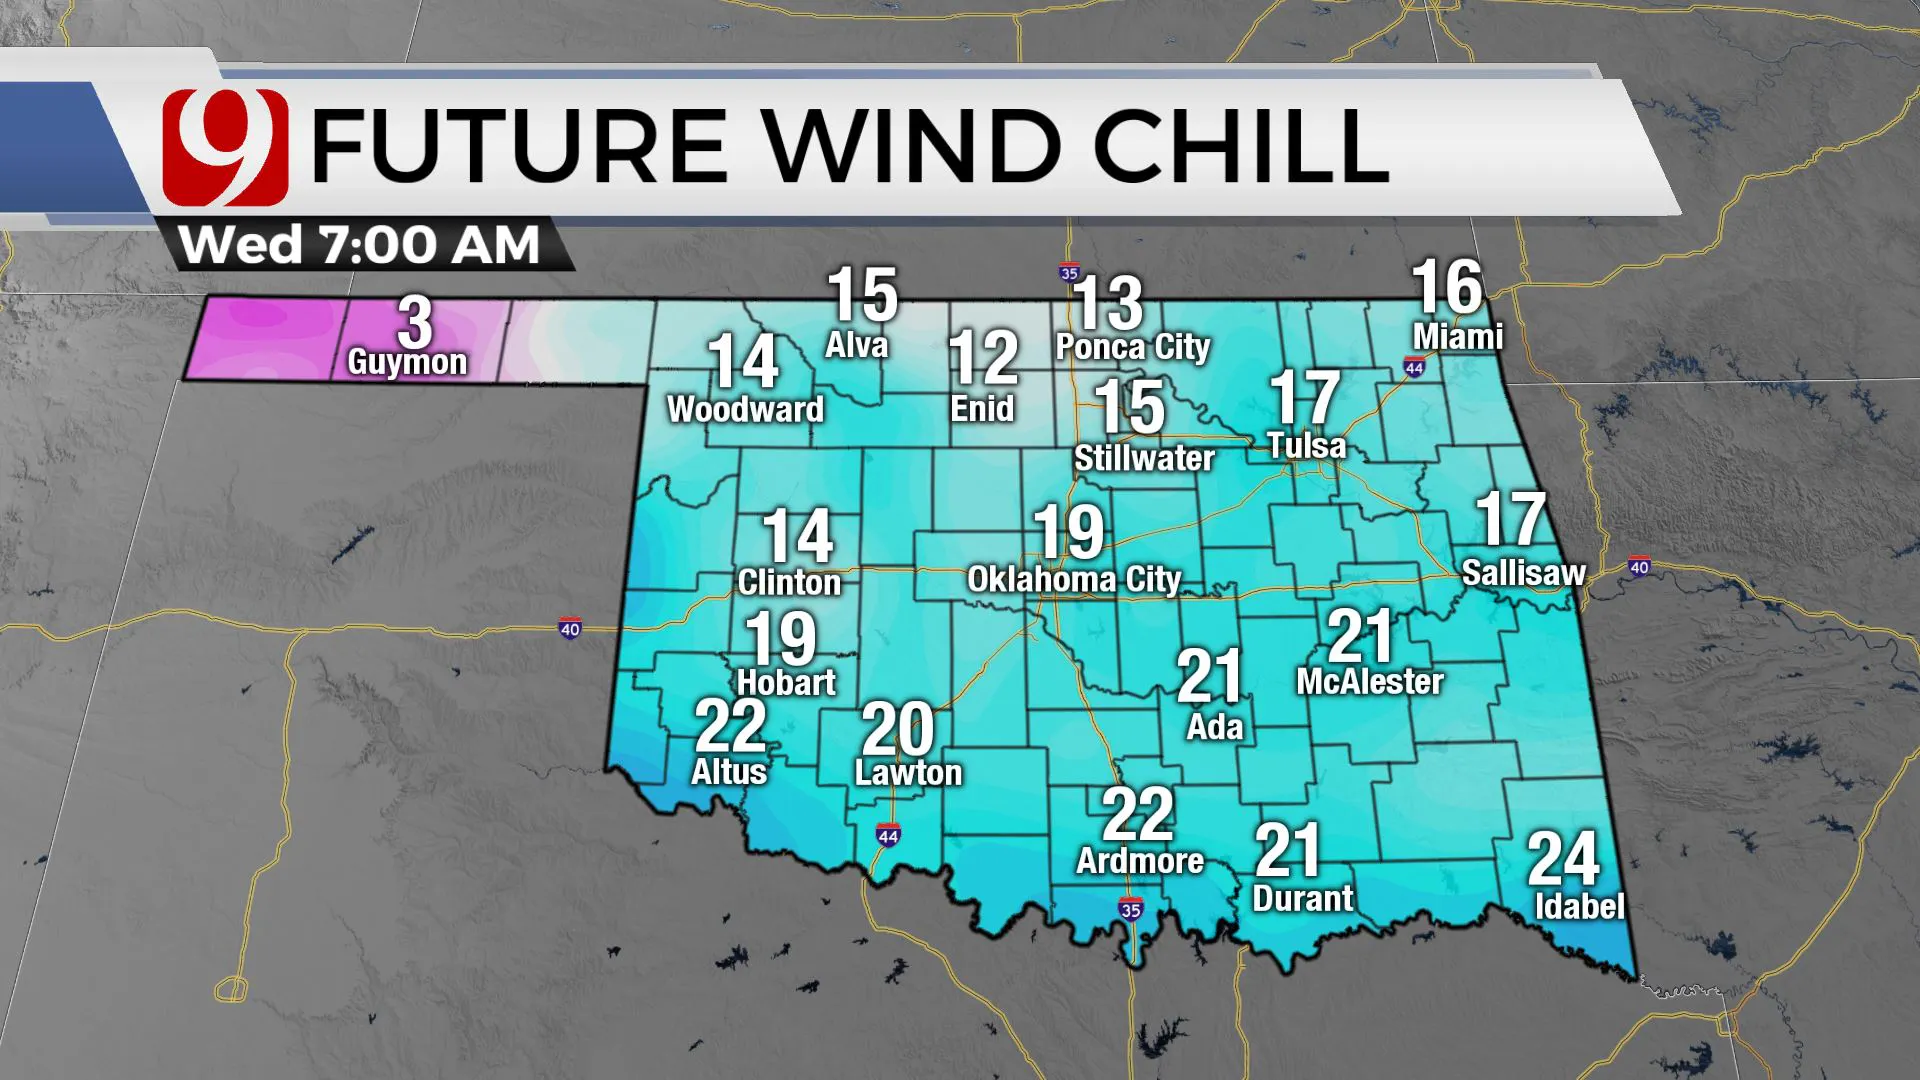 Future wind chill for Wednesday.